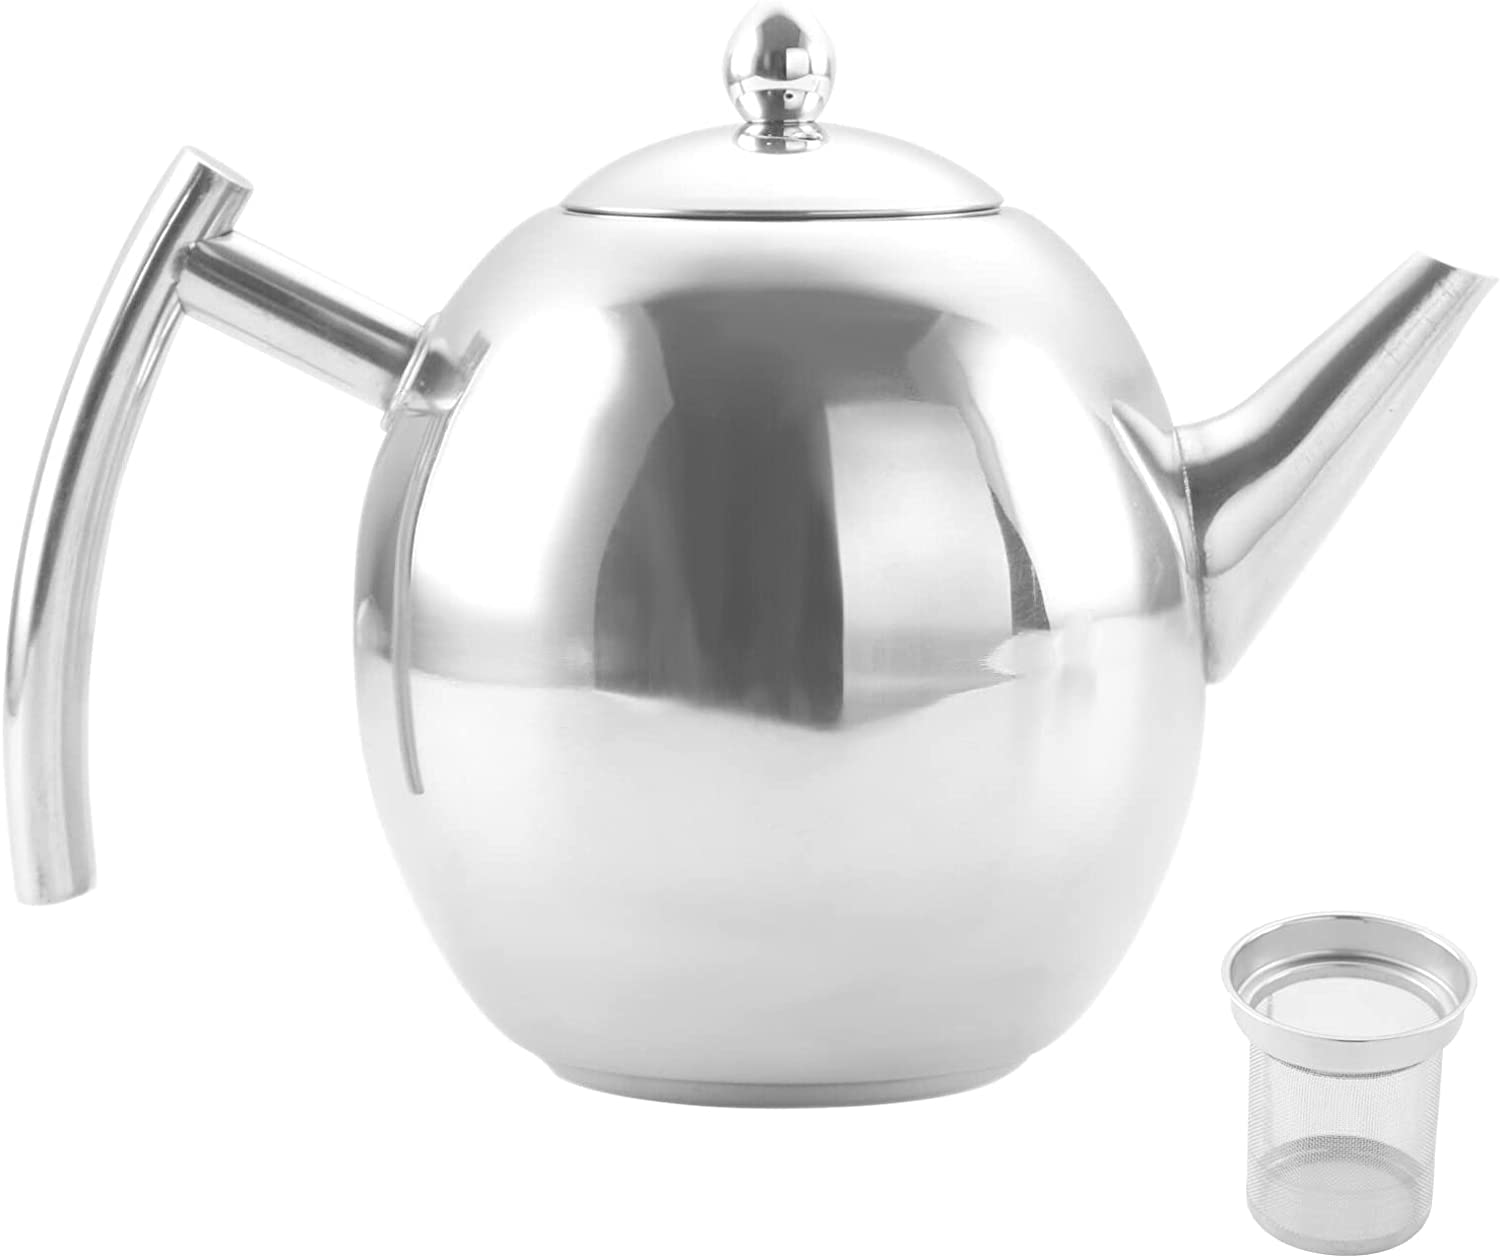 Stainless Steel Teapot with Strainer Insert, 1.5 L / 2 L Kettle Coffee Pot with Lid and Carry Handle, Heated Tea Maker for All Scented Tea and Infusion Tea (Upgrade: 1.5 L)